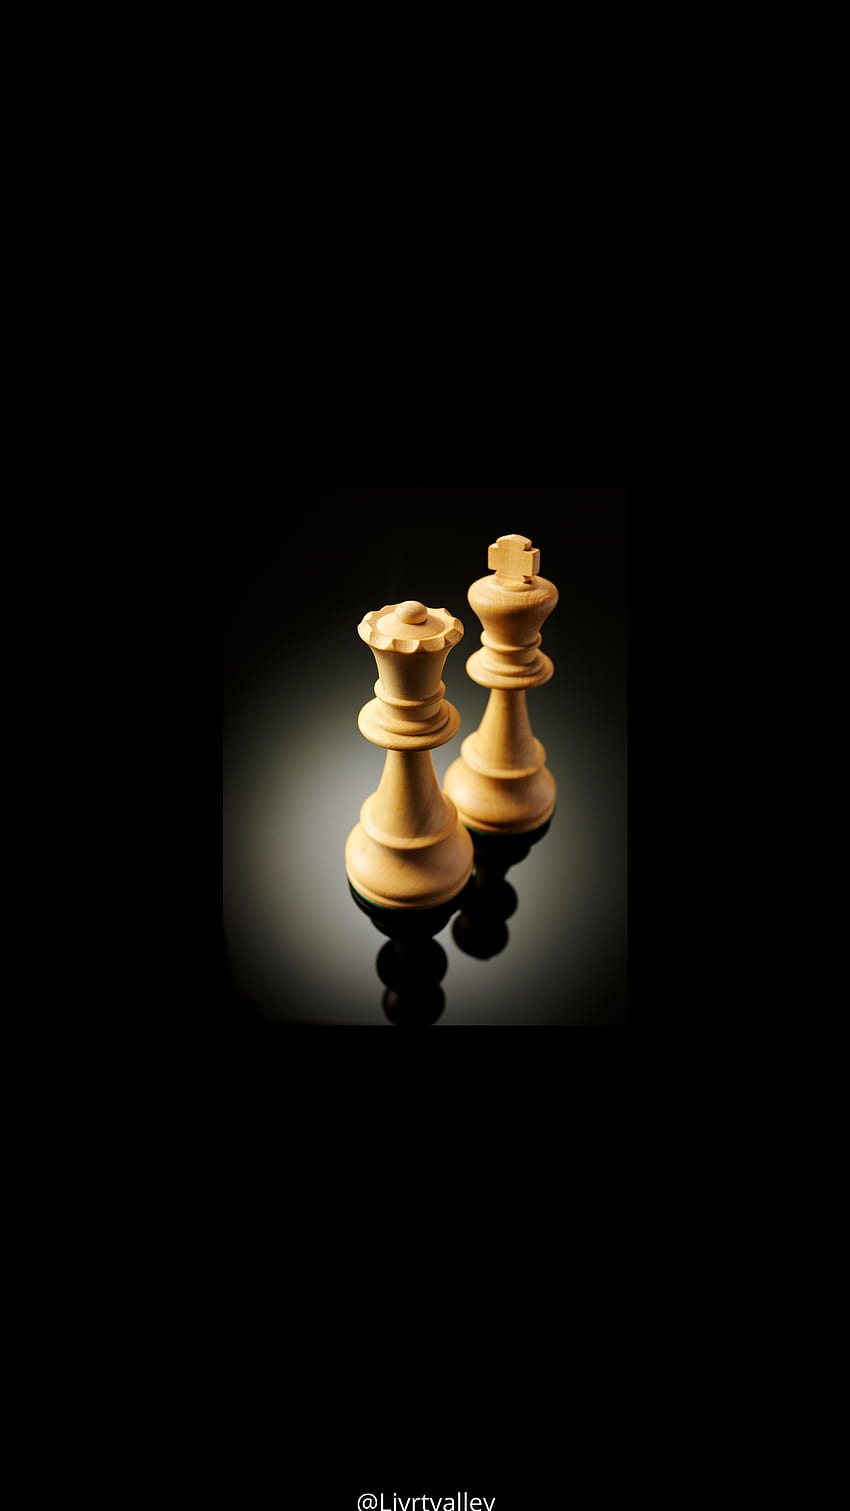 Checkmate HD Wallpaper  Chess queen, Chess king, Chess